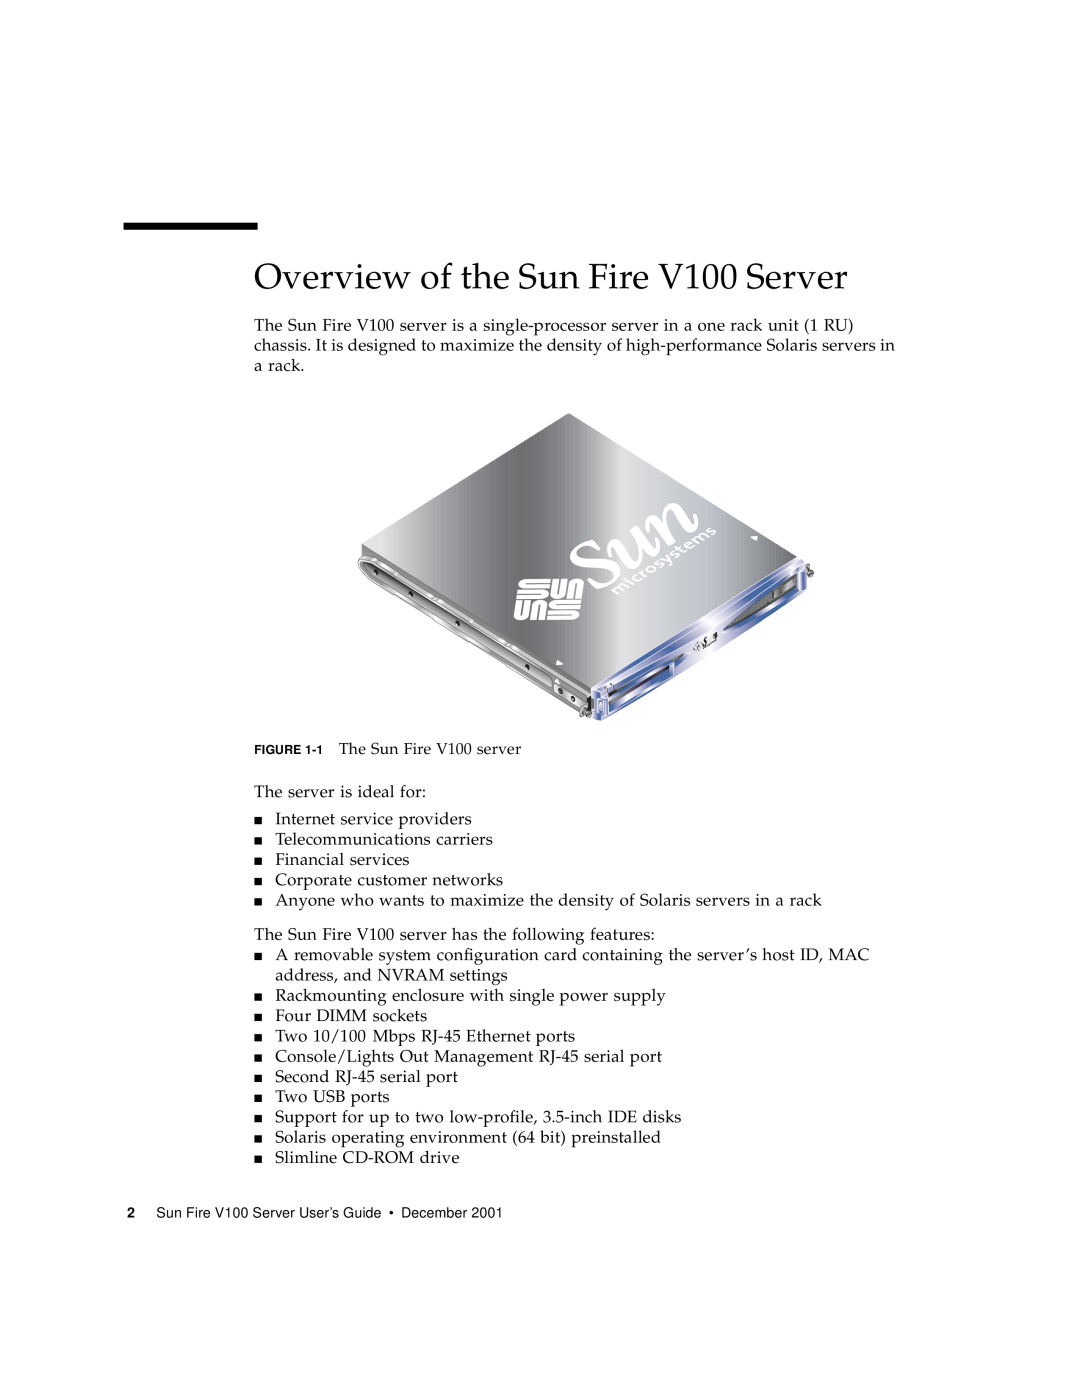 Sun Microsystems manual Overview of the Sun Fire V100 Server 